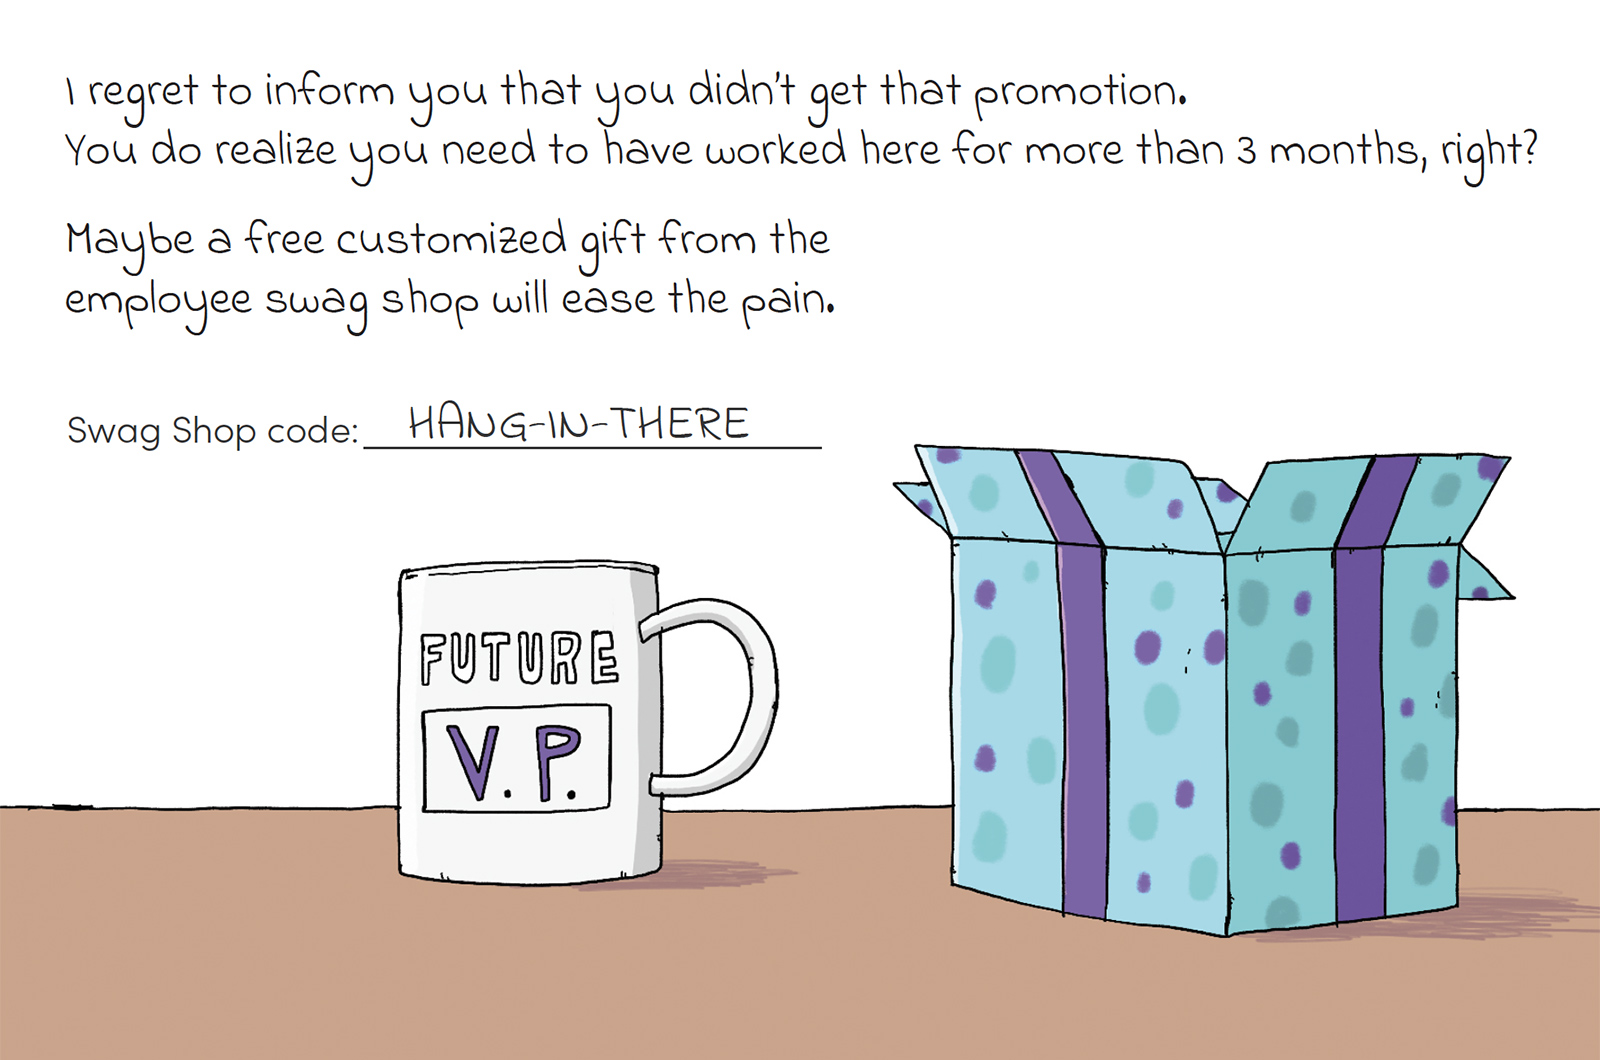 Open gift box and mug that says "Future VP" on it, with advice that you need to work here for more than 3 months to get a promotion.